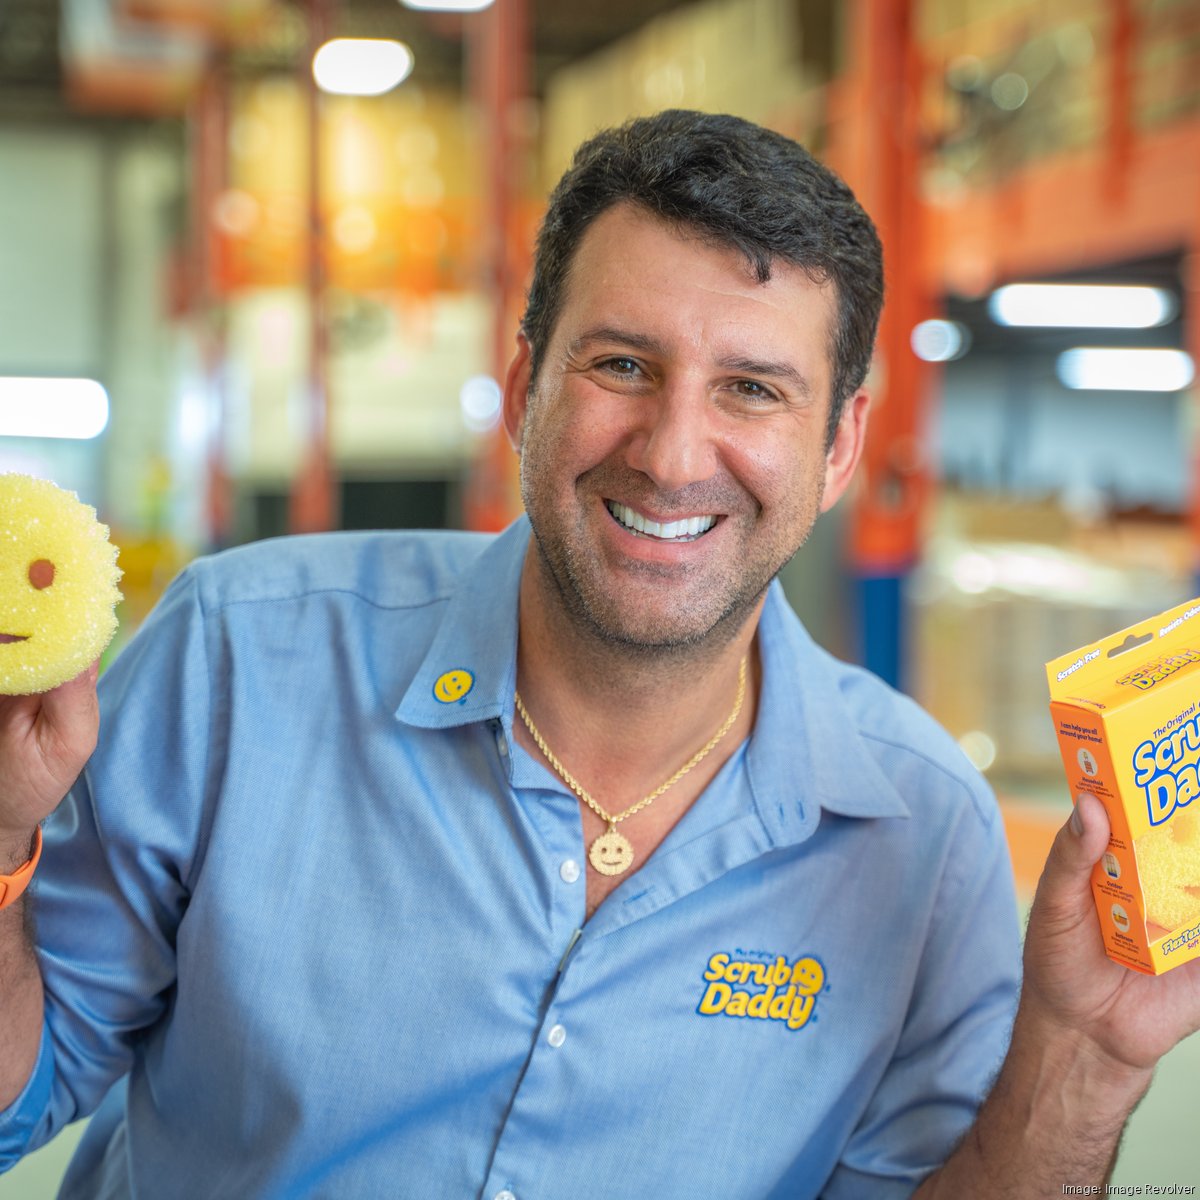 Shark Tank alum Scrub Daddy building first retail Smile Shop with new line  of products set to debut - Philadelphia Business Journal